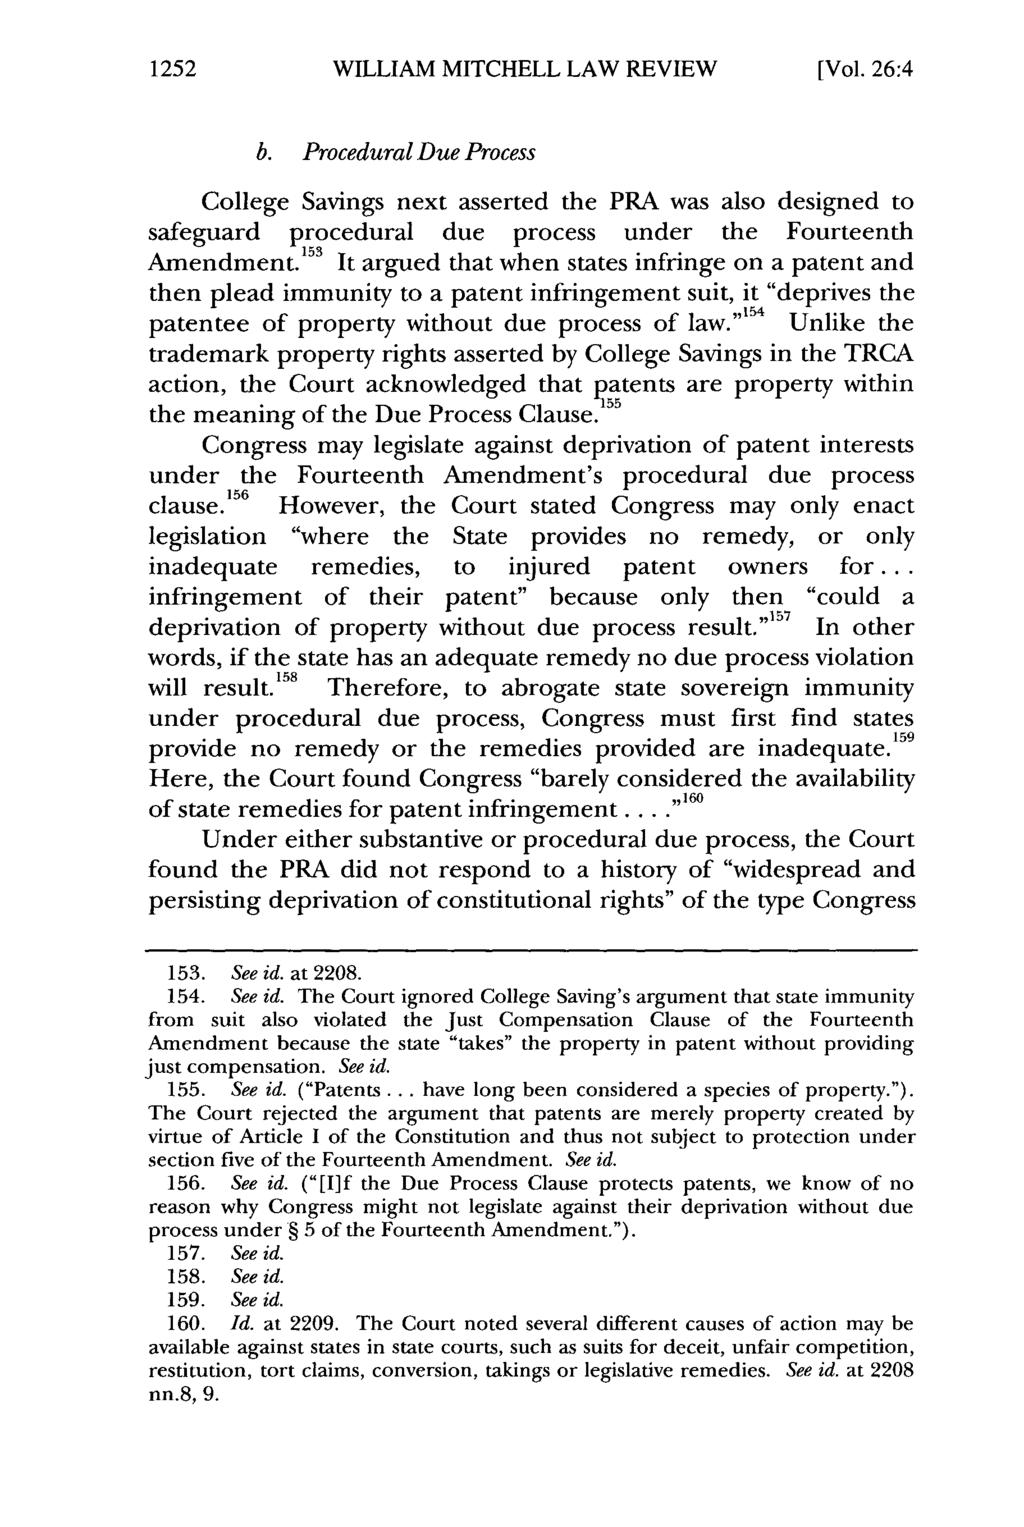 1252 William WILLIAM Mitchell Law MITCHELL Review, Vol. 26, LAW Iss. 4 [2000], REVIEW Art. 12 [Vol. 26:4 b.